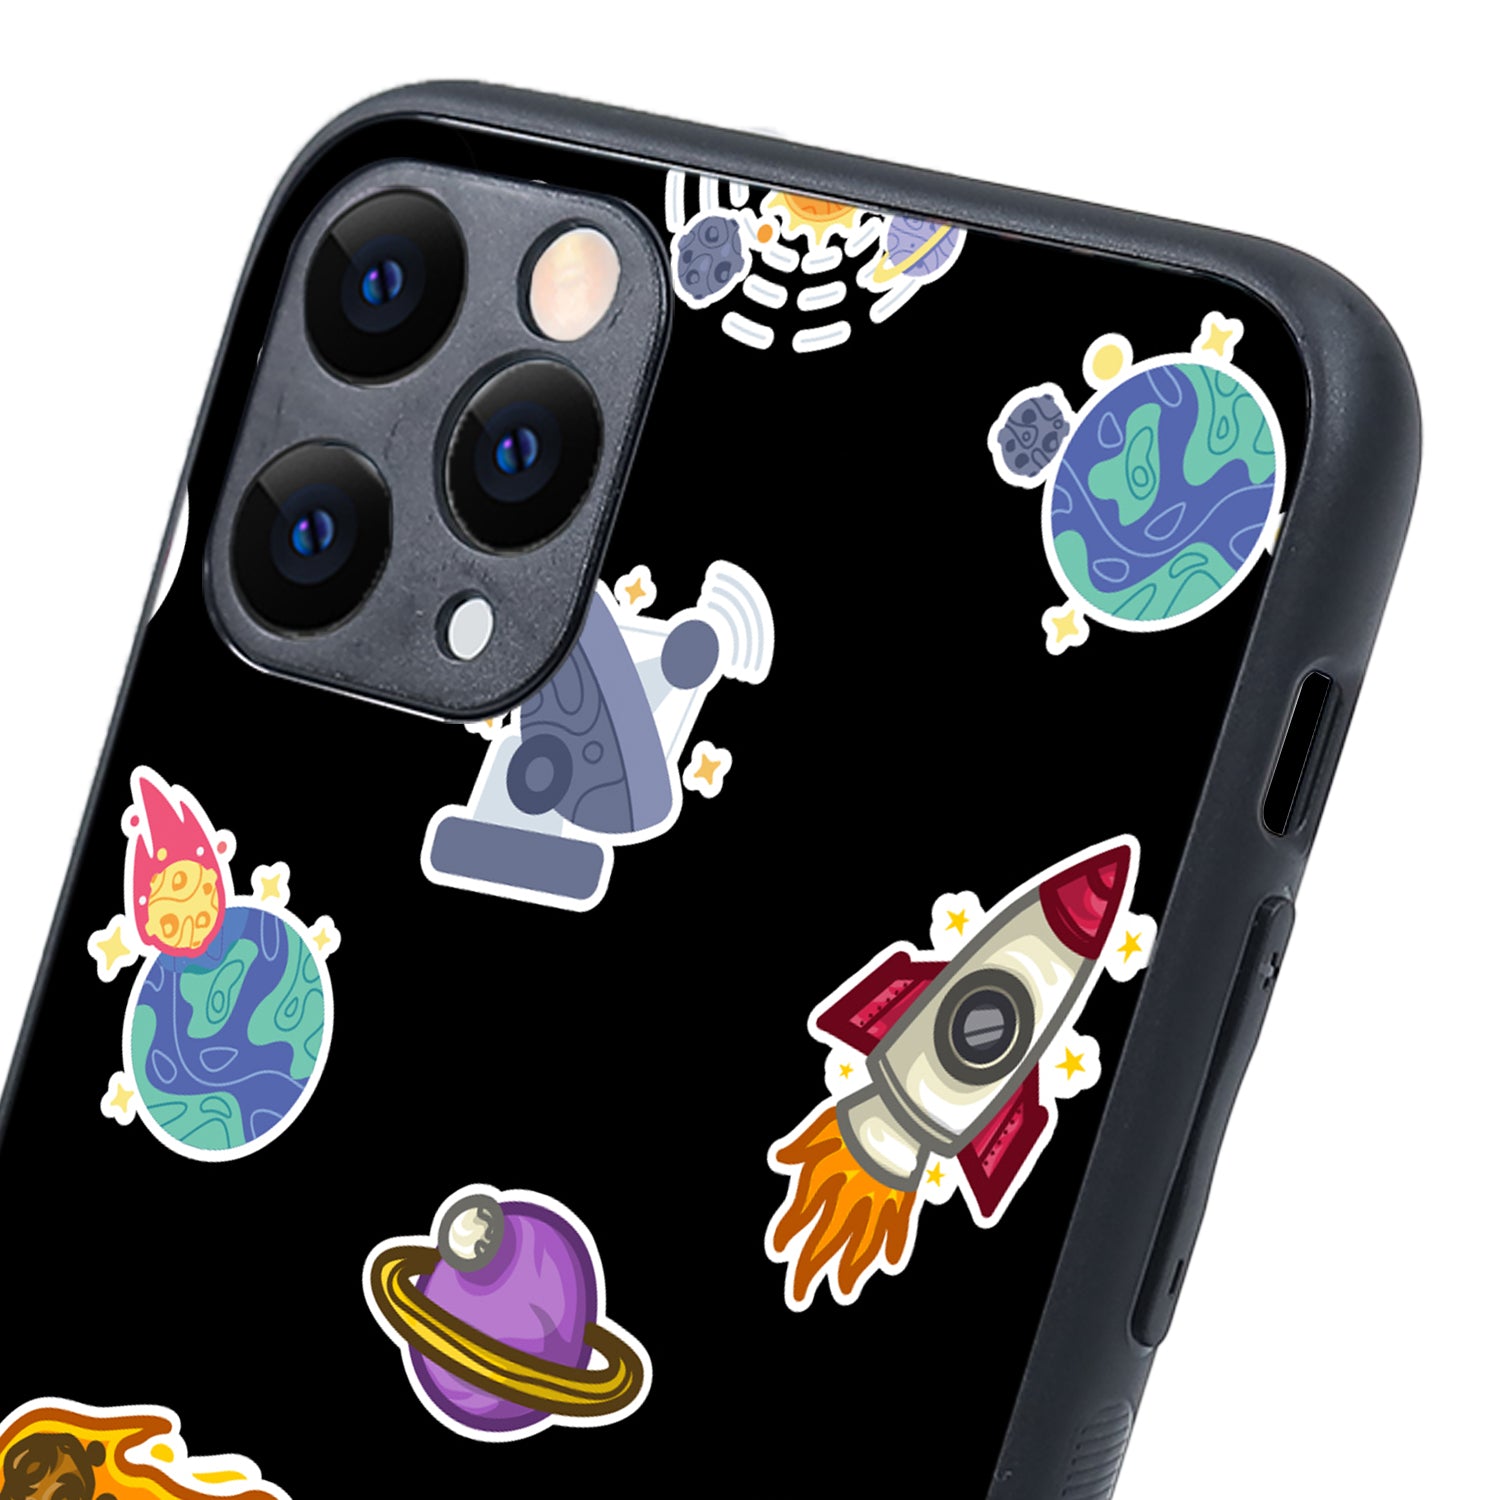 Stickers Space iPhone 11 Pro Max Case